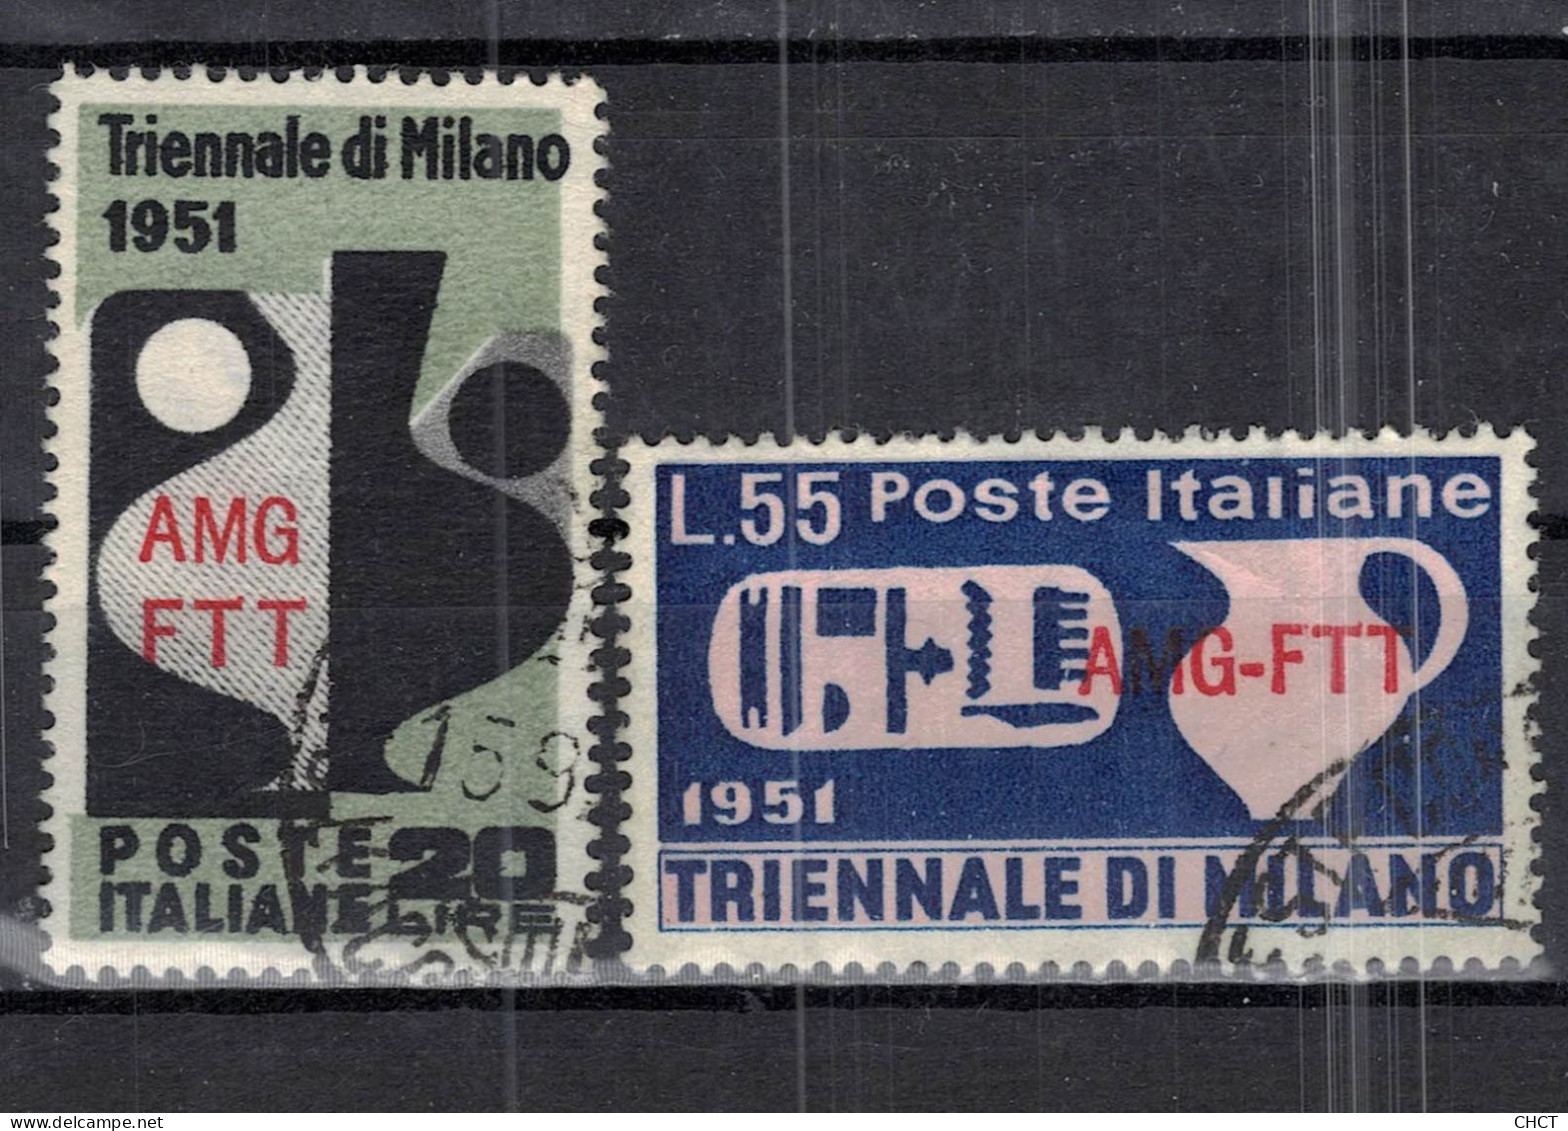 CHCT74 - Milan Triannual, Triennale Di Milano, AMG-FTT Overprint, Trieste A, 1951, Complete Series, Italy - Used